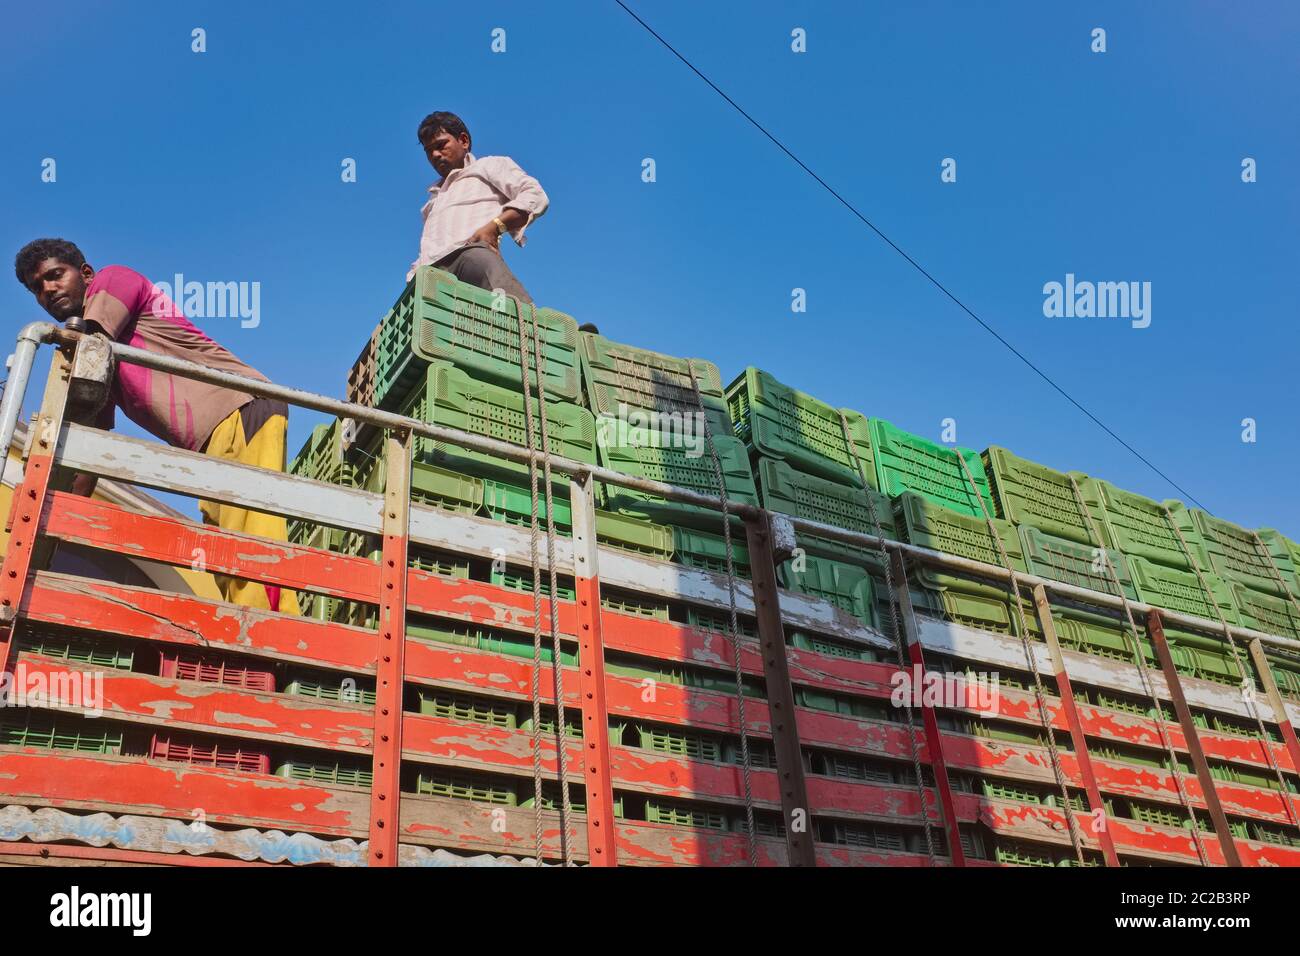 Employees of a trucking company standing on top of a truck laden with goods, against a deep blue, sunny sky; Mumbai, India Stock Photo